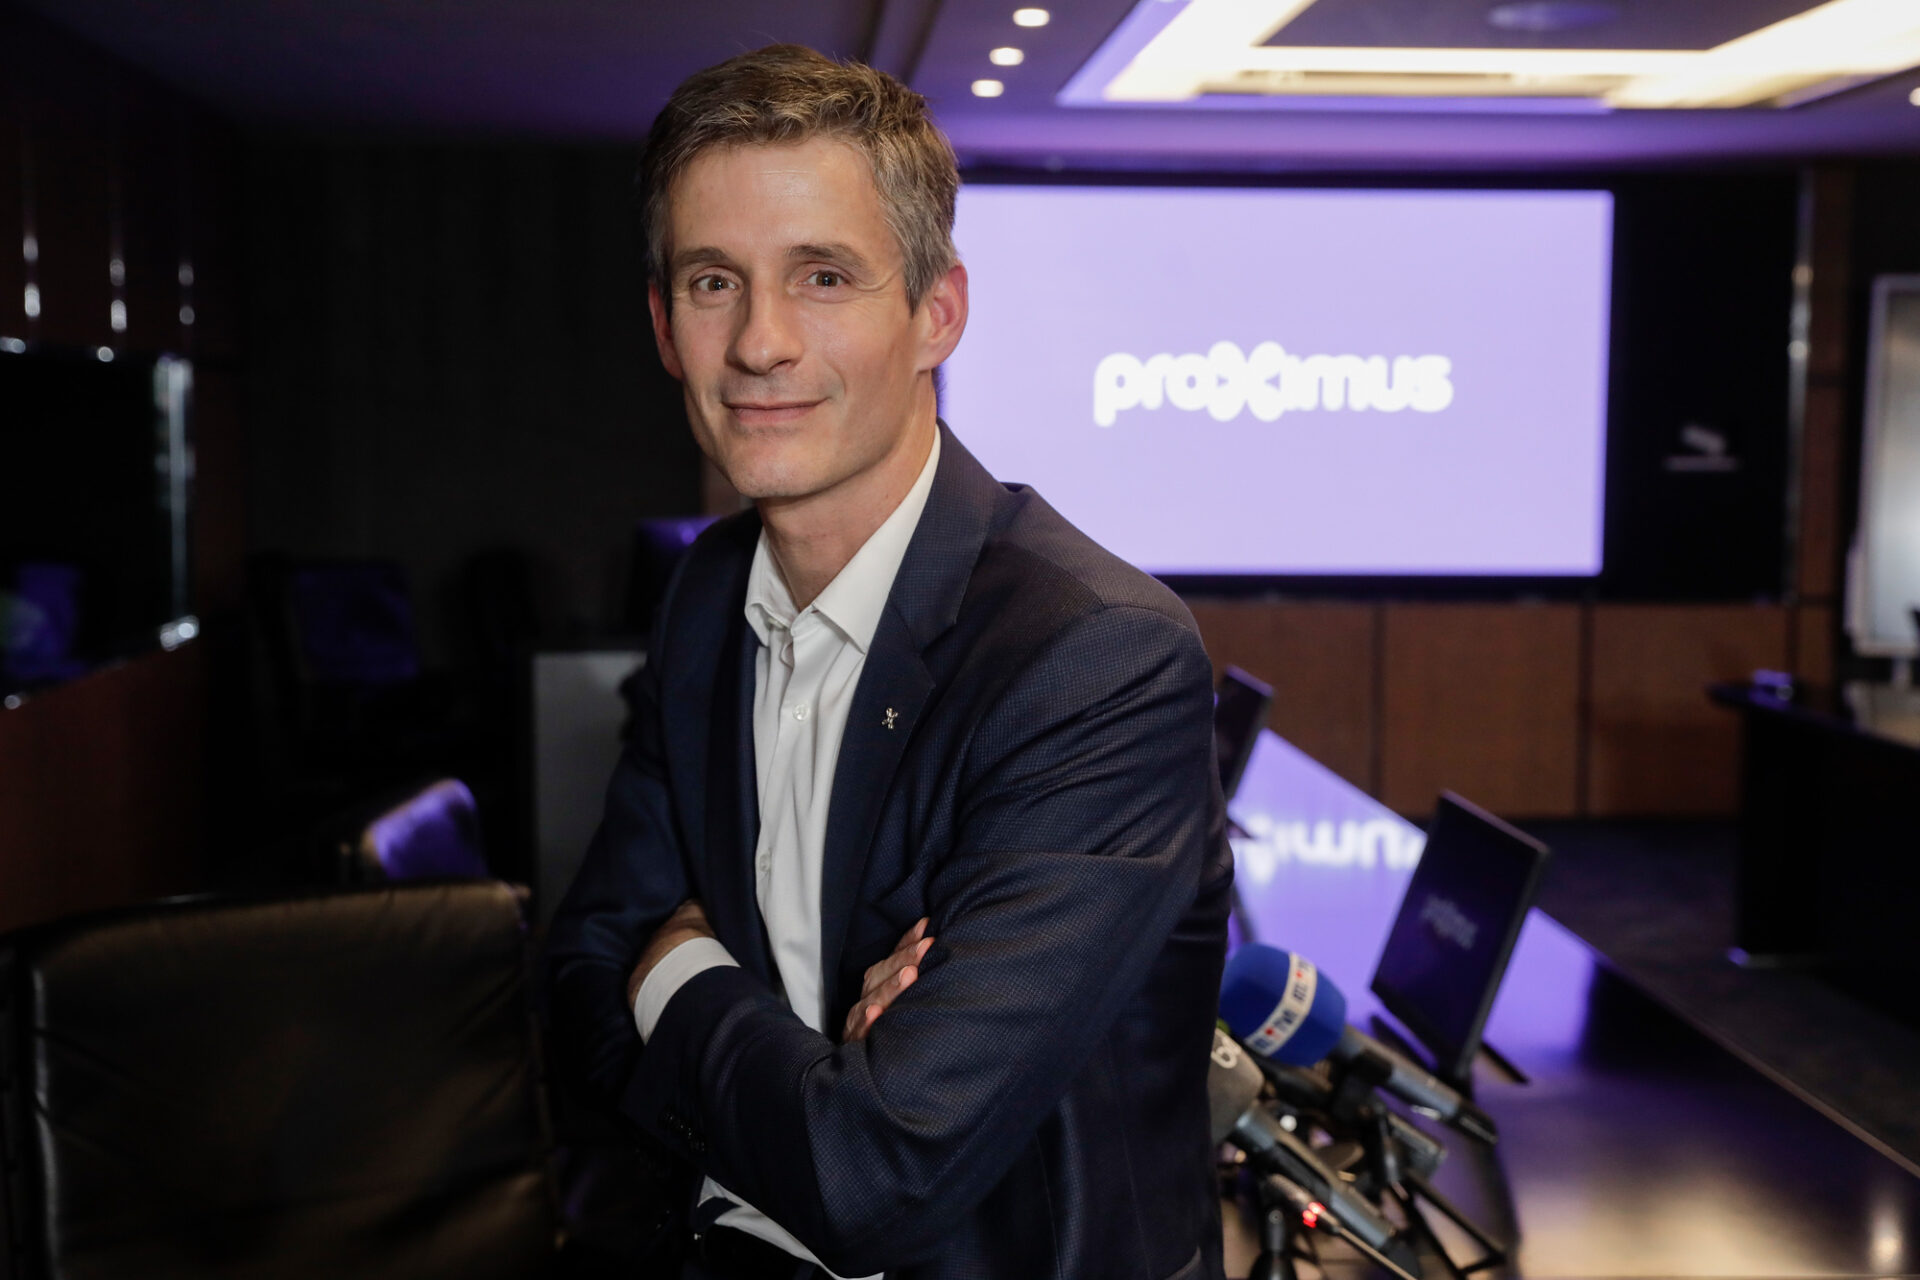 New Proximus CEO Guillaume Boutin poses for the photographer after a press conference of Belgian telecommunications group Proximus, at their headquarters in Brussels, Wednesday 27 November 2019. BELGA PHOTO THIERRY ROGE